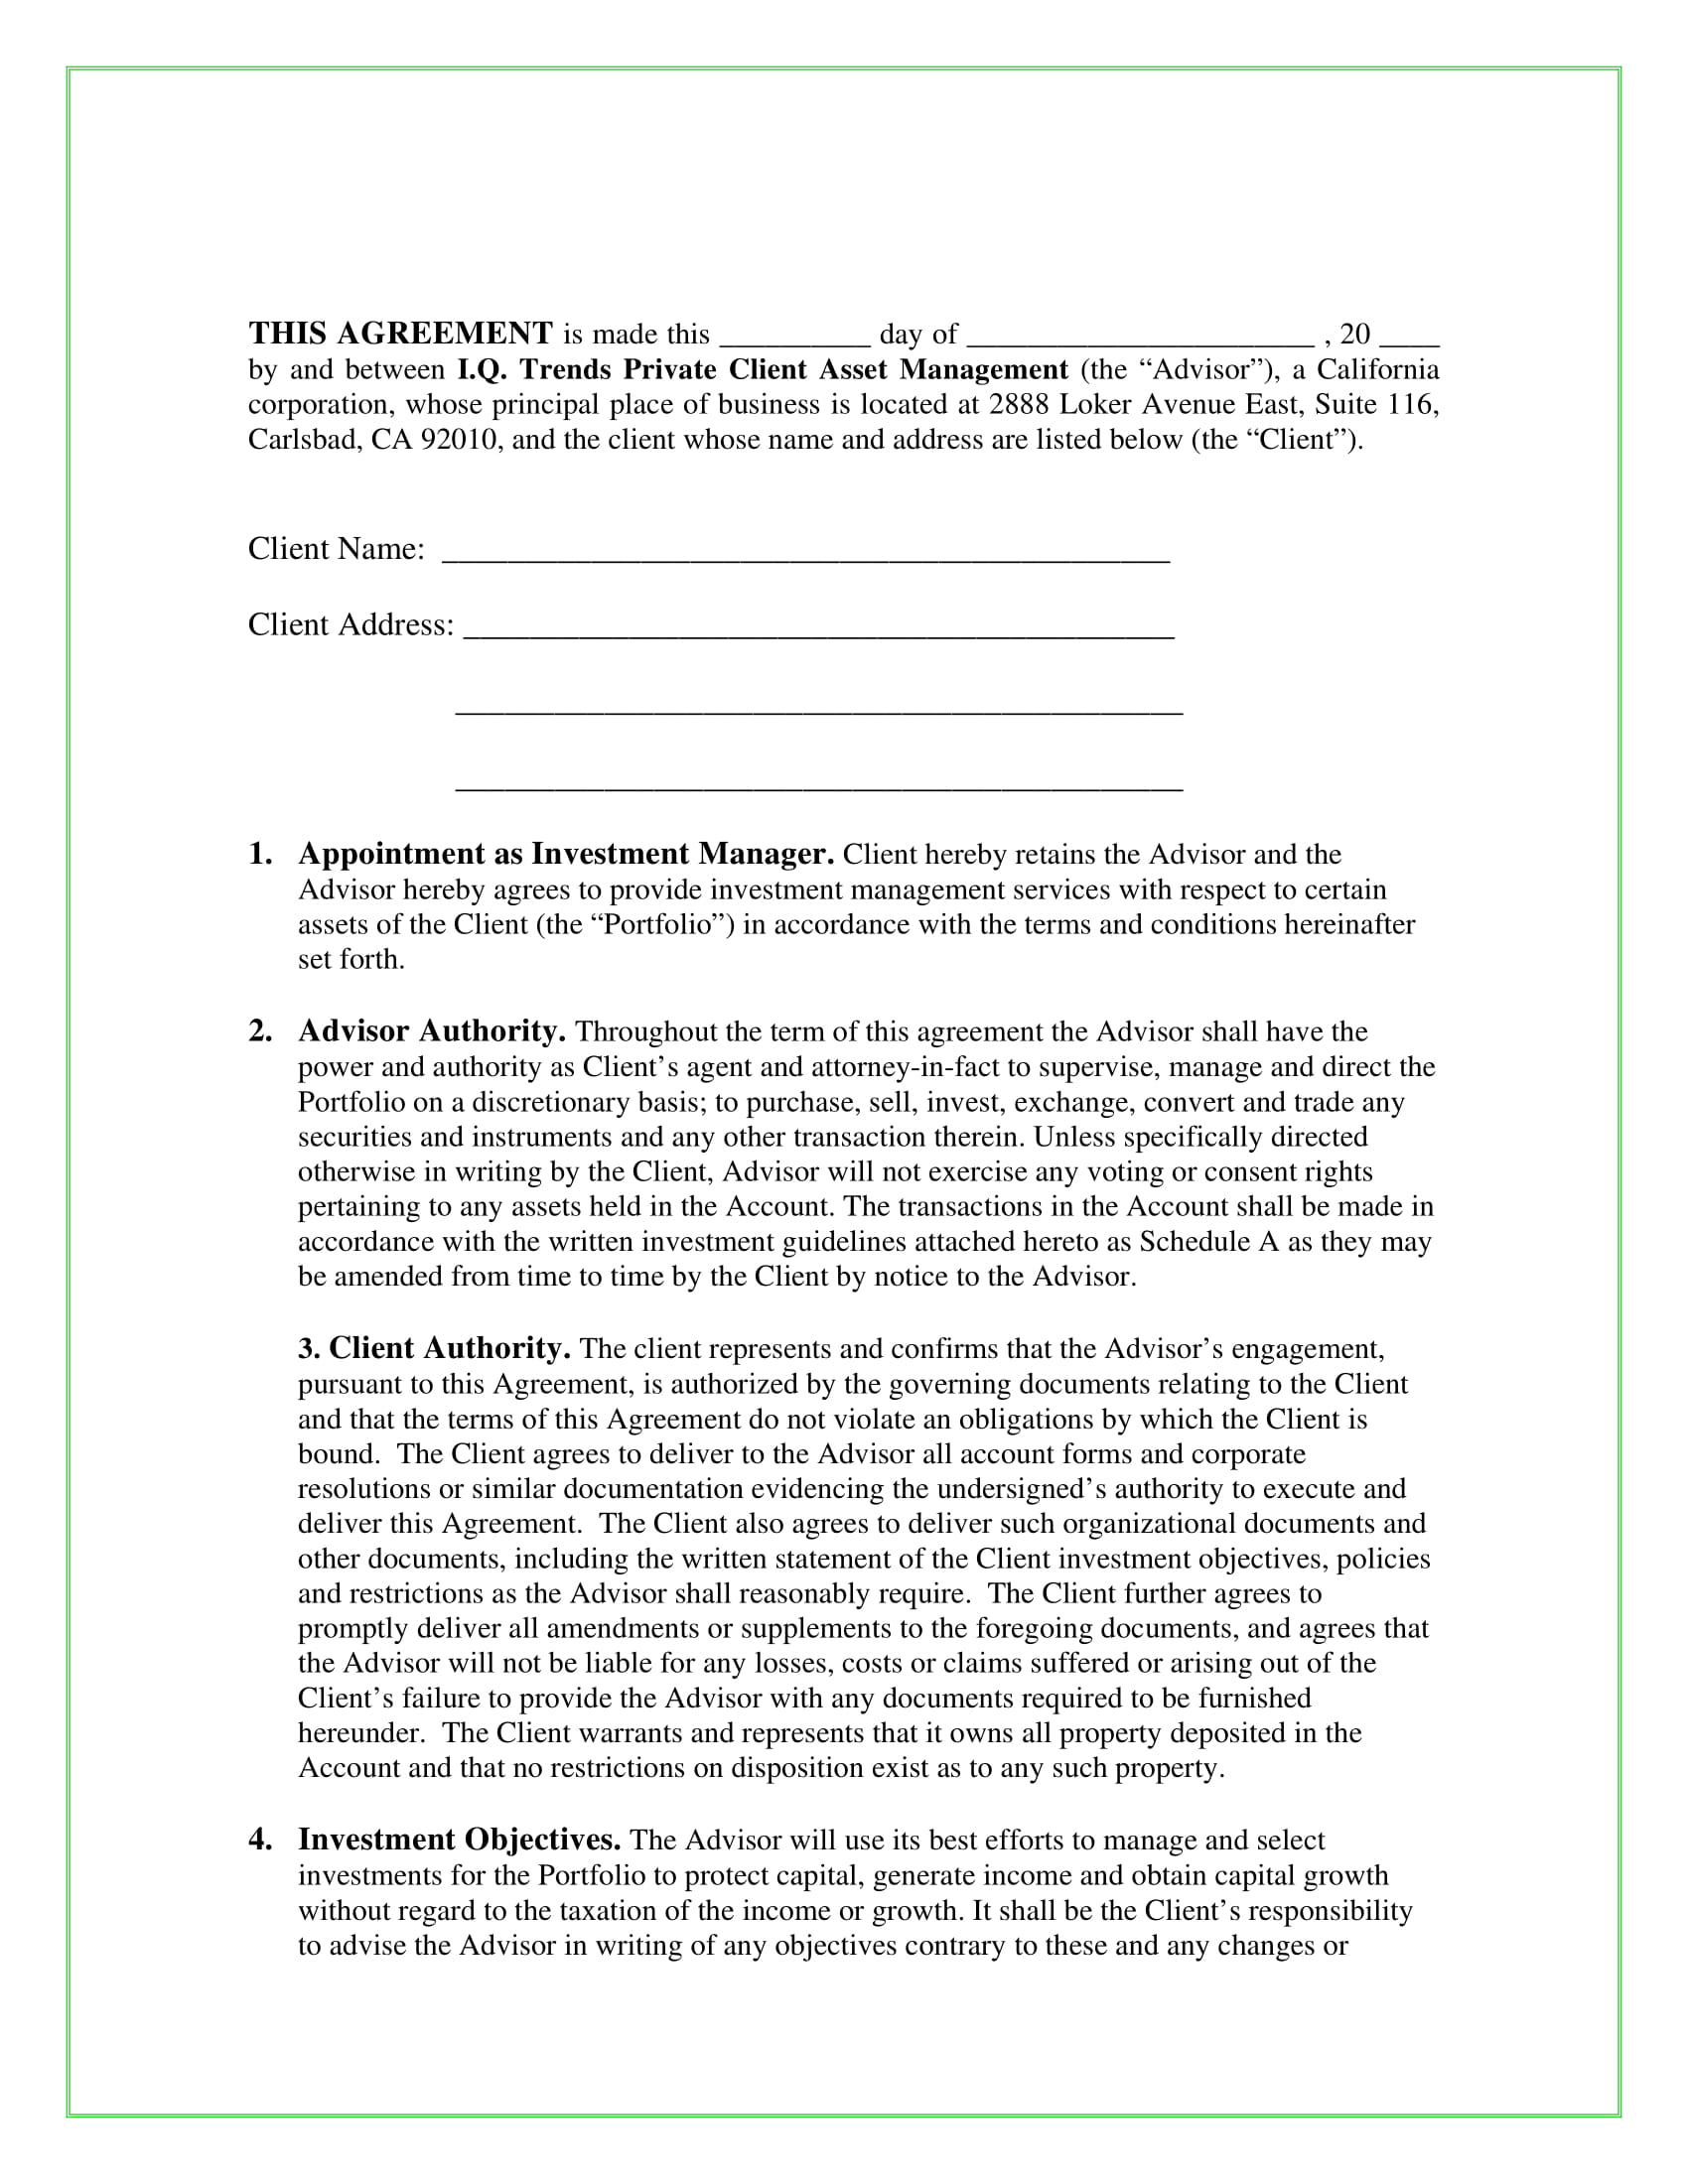 investment management services agreement example